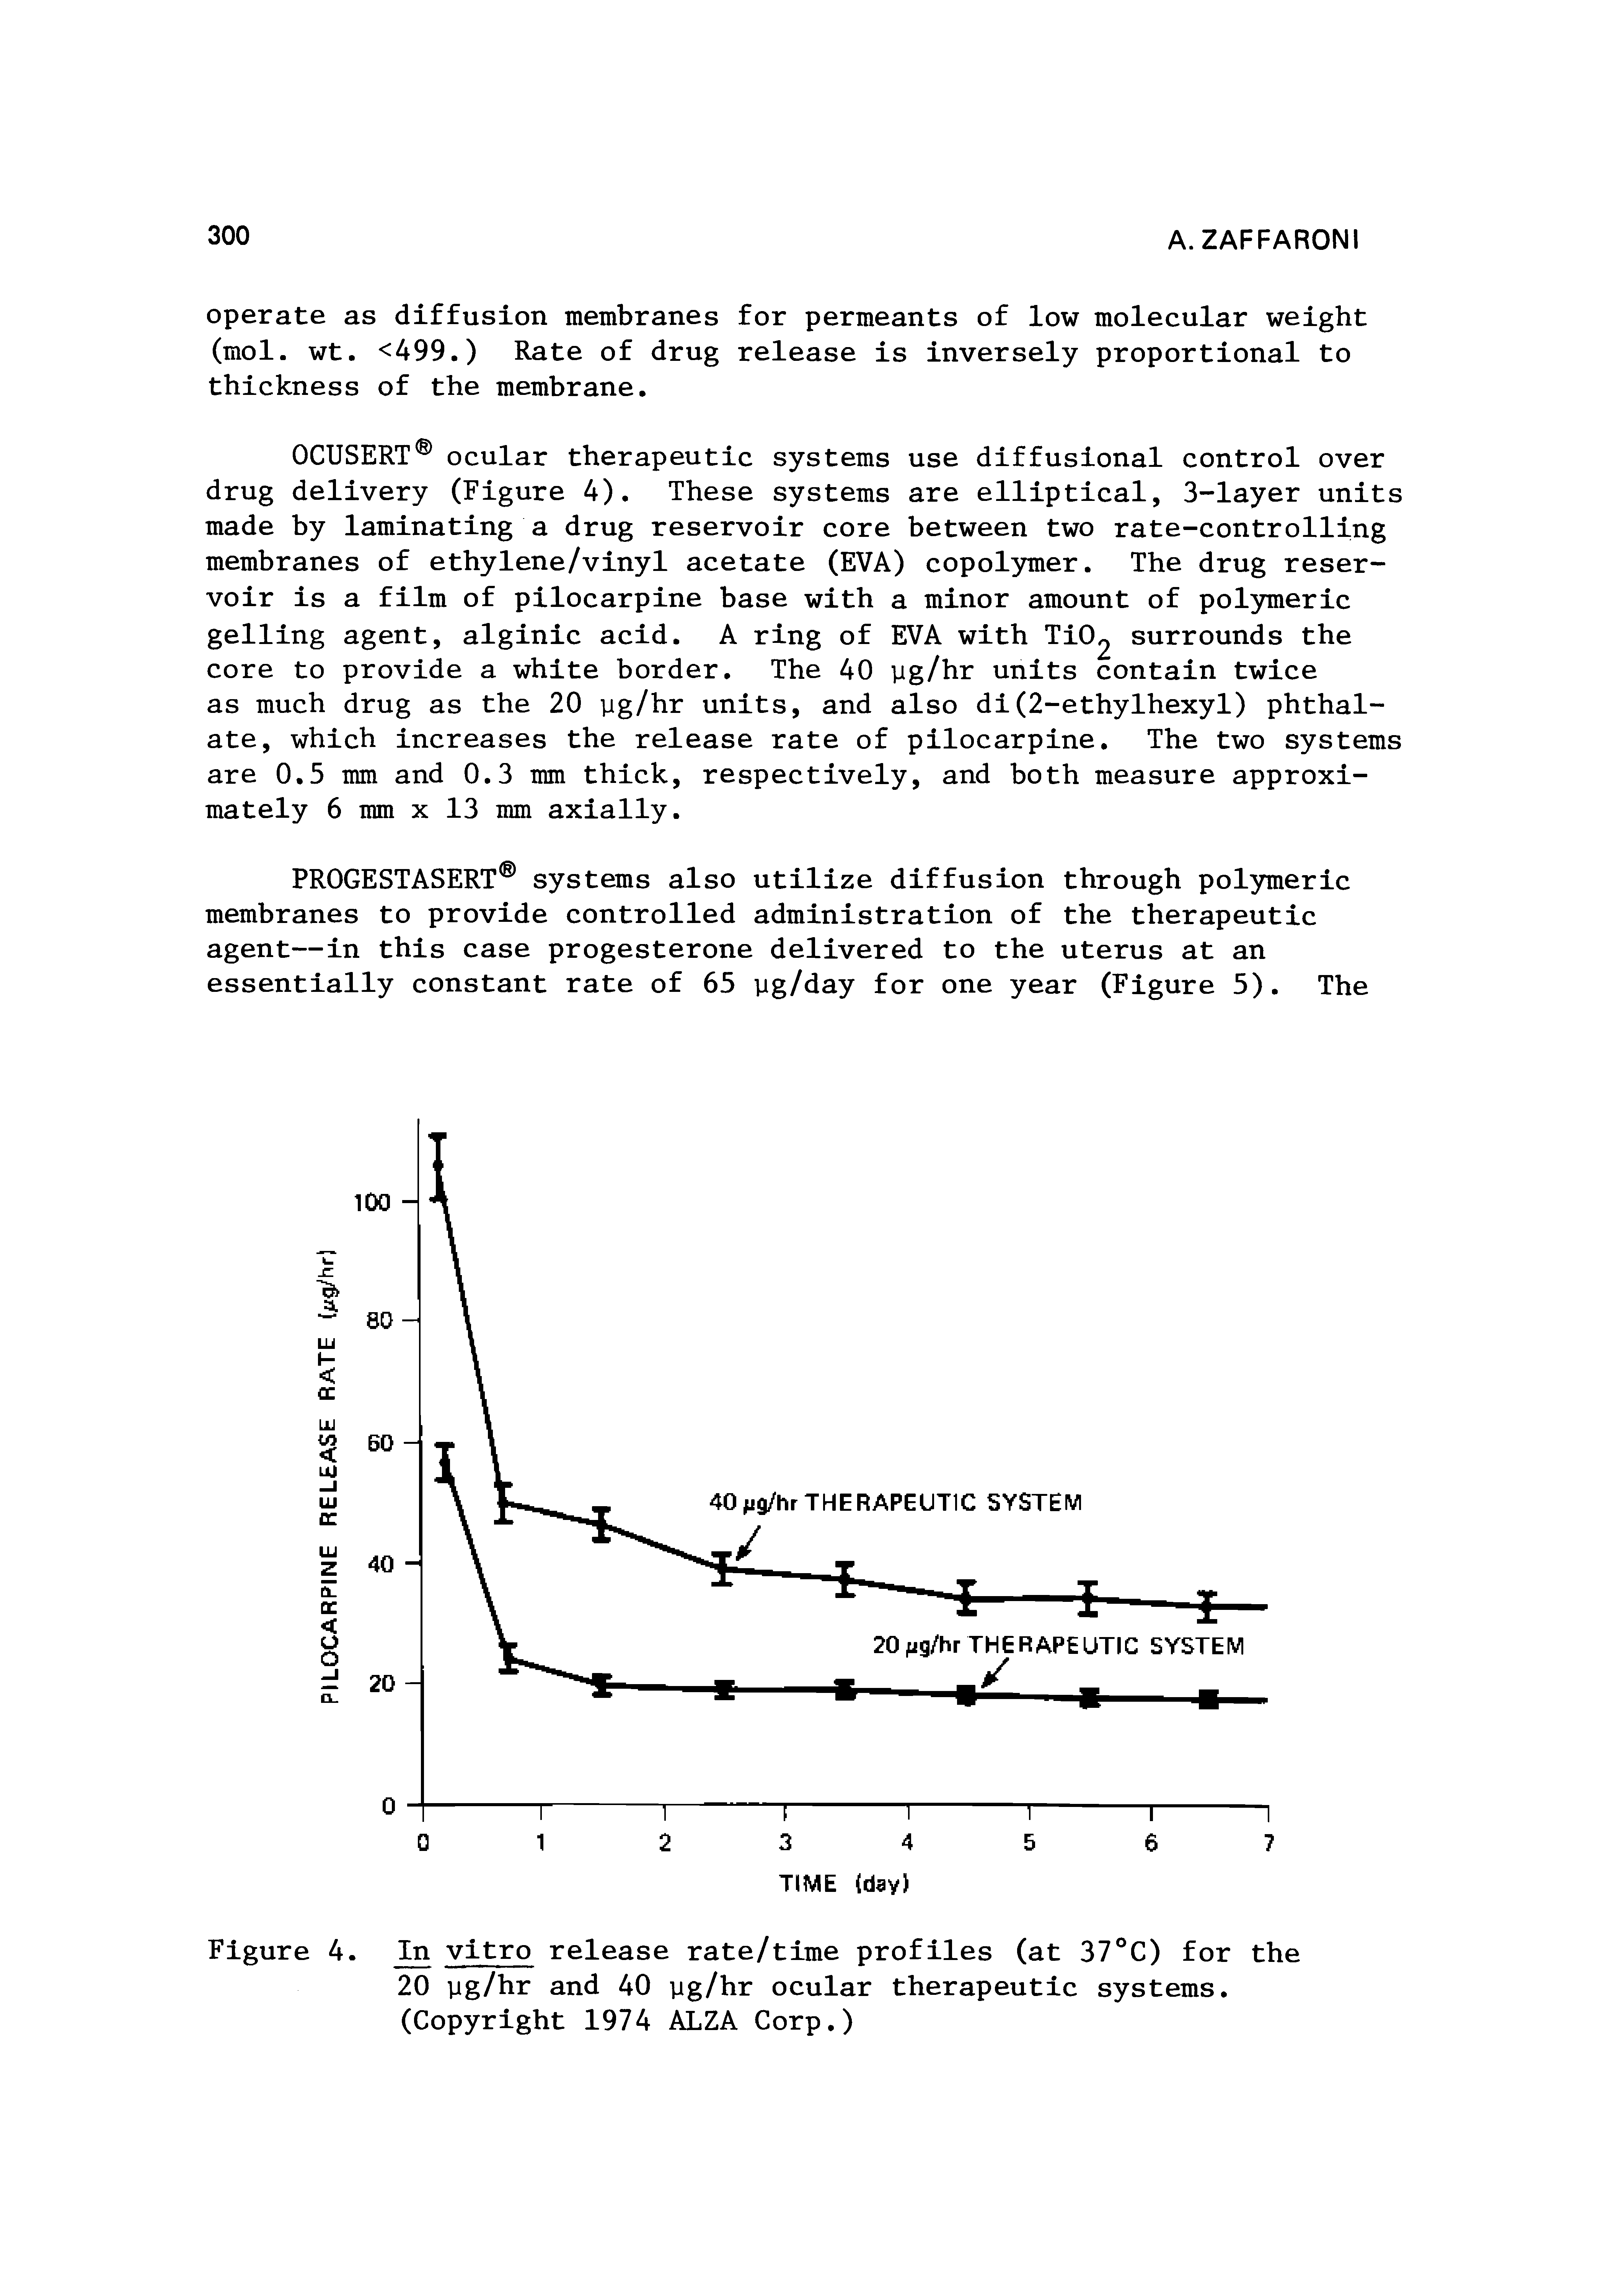 Figure 4. In vitro release rate/time profiles (at 37 C) for the 20 yg/hr and 40 yg/hr ocular therapeutic systems. (Copyright 1974 ALZA Corp.)...